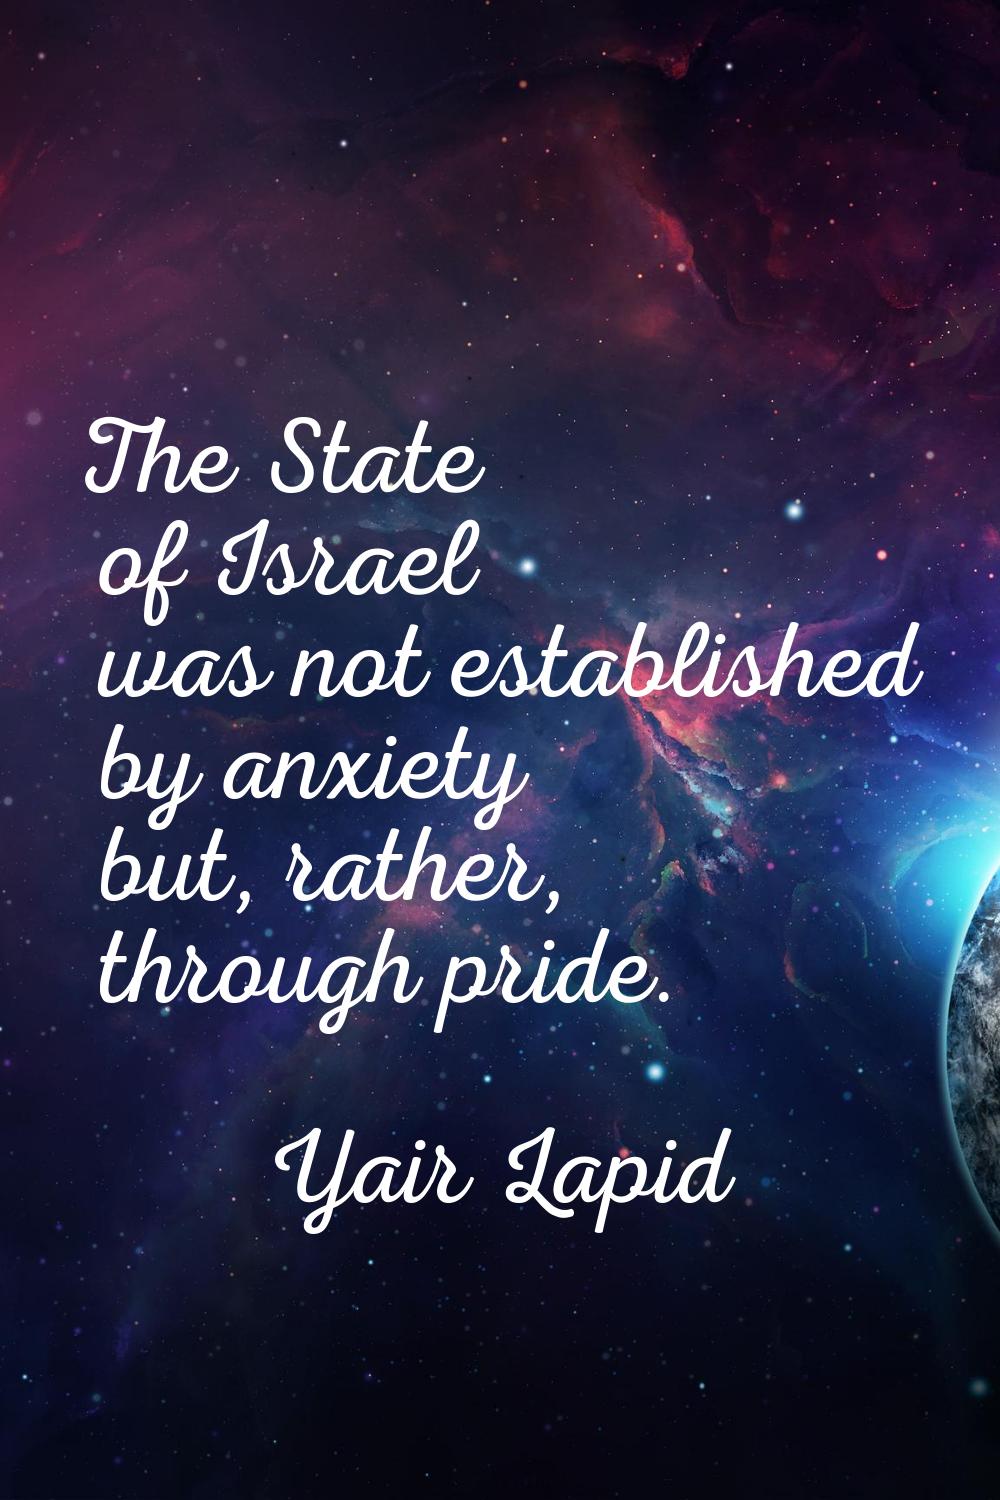 The State of Israel was not established by anxiety but, rather, through pride.